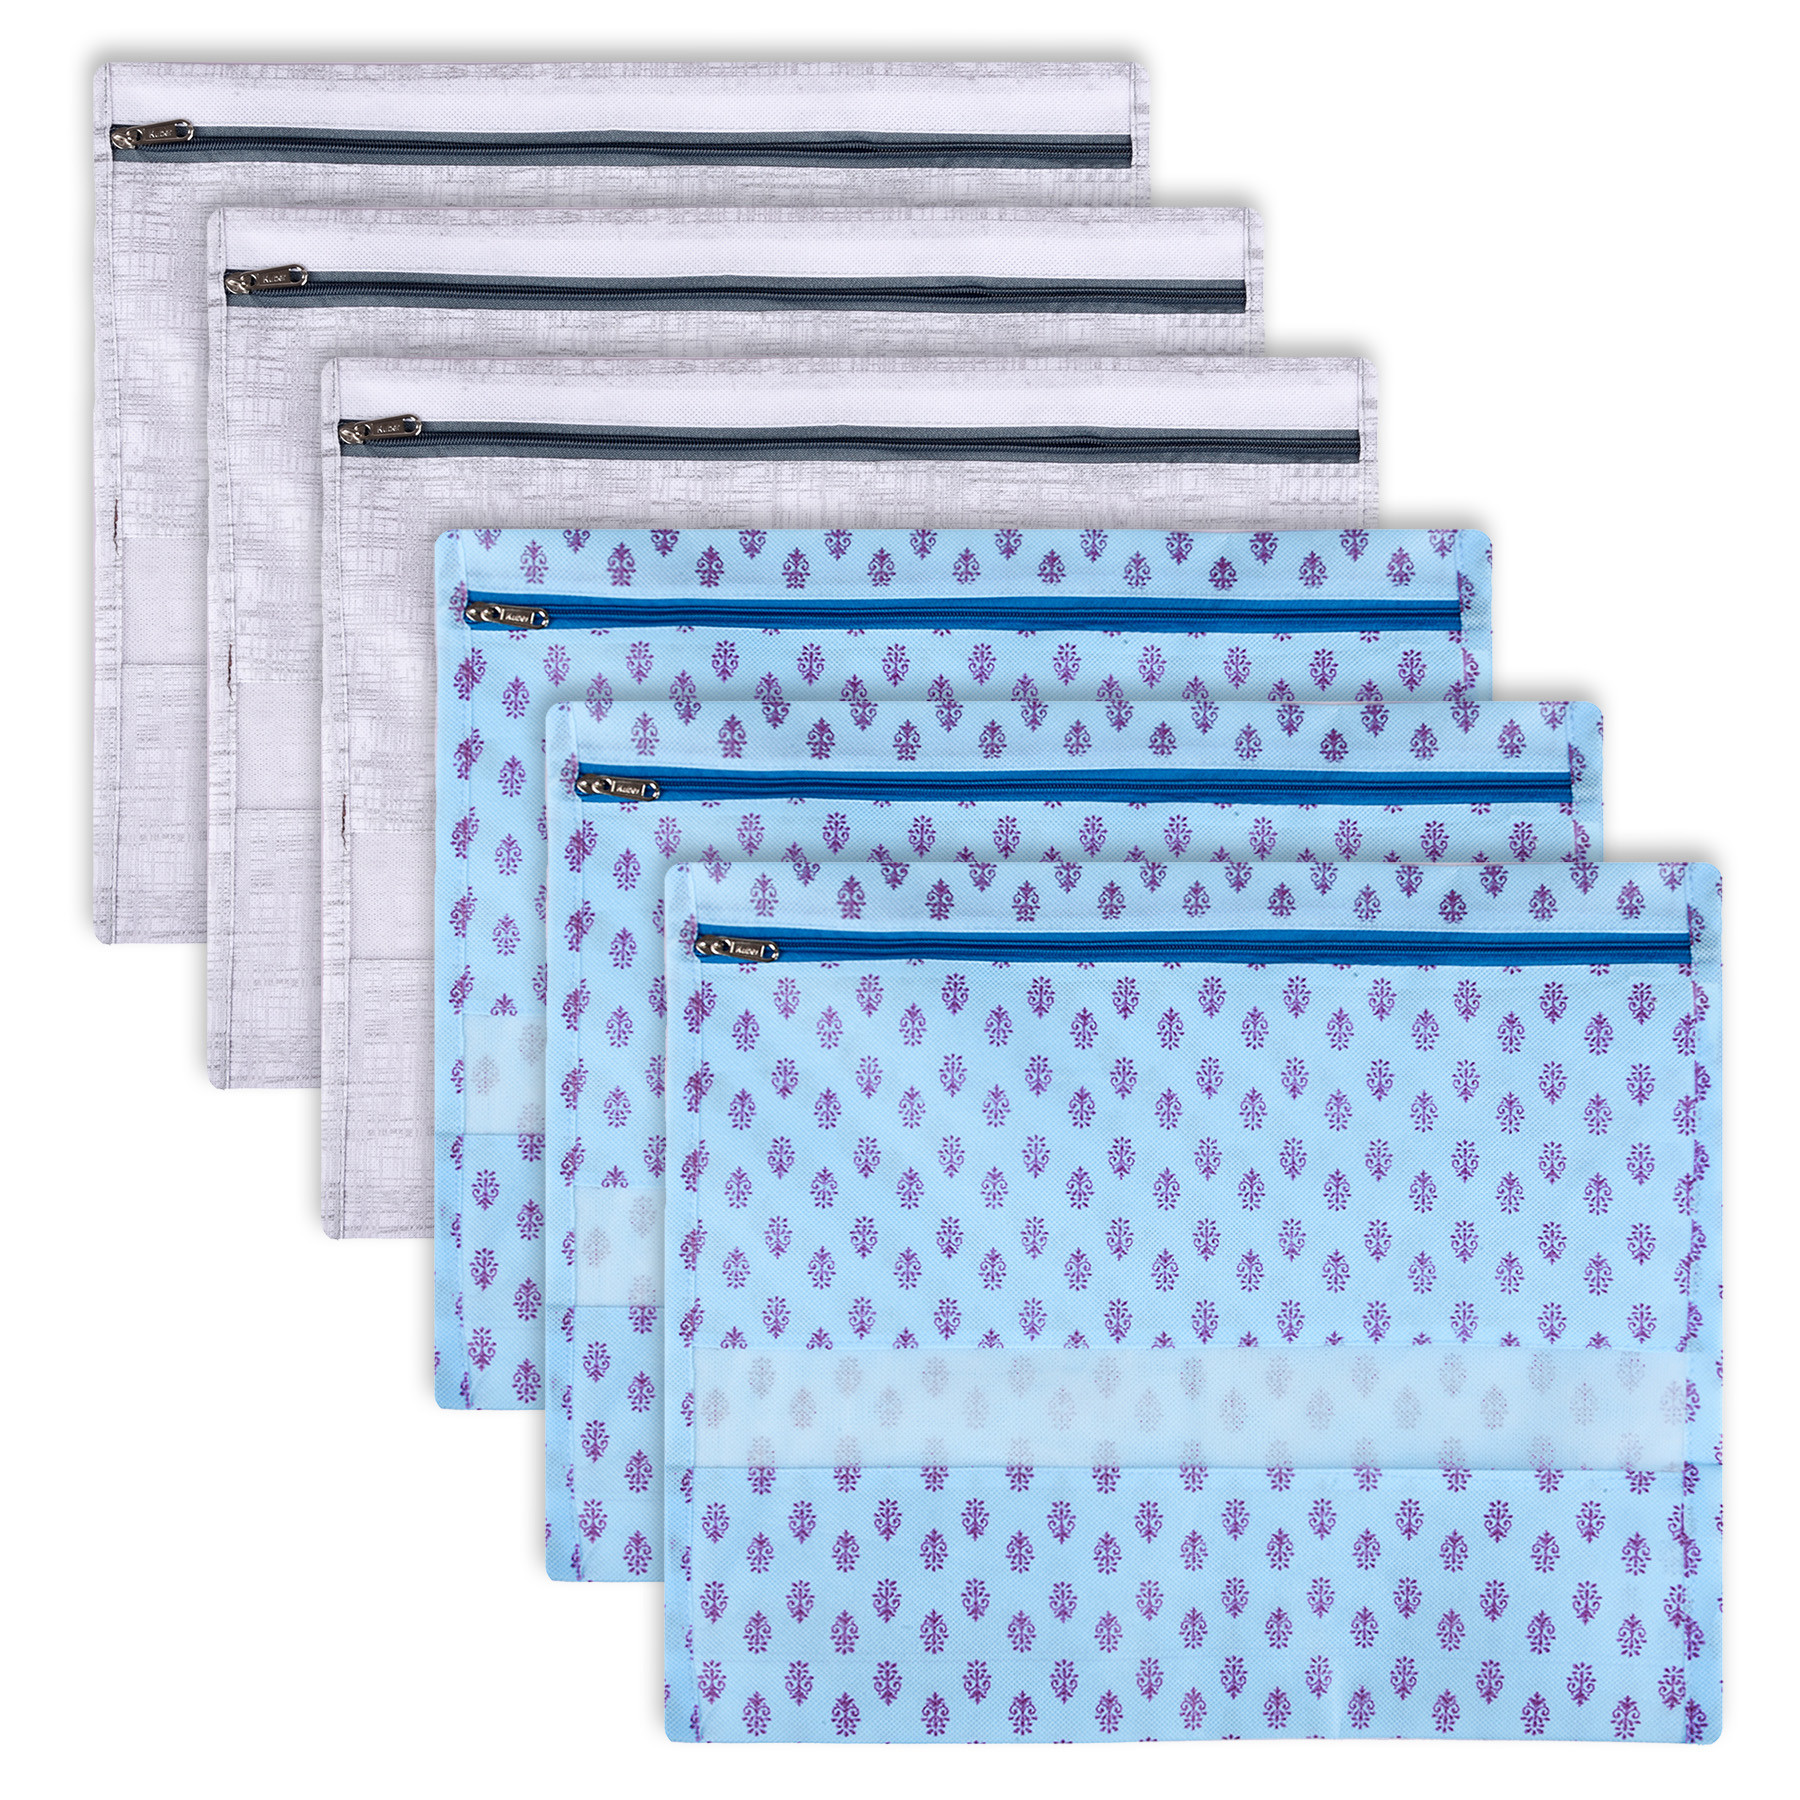 Kuber Industries Saree Bags | Clothes Bags for Storage | Non-Woven Wardrobe Organizer | Mesh Window Cloth Storage Bags Set | Single Packing Saree Bags | Printed | Gray & Sky Blue